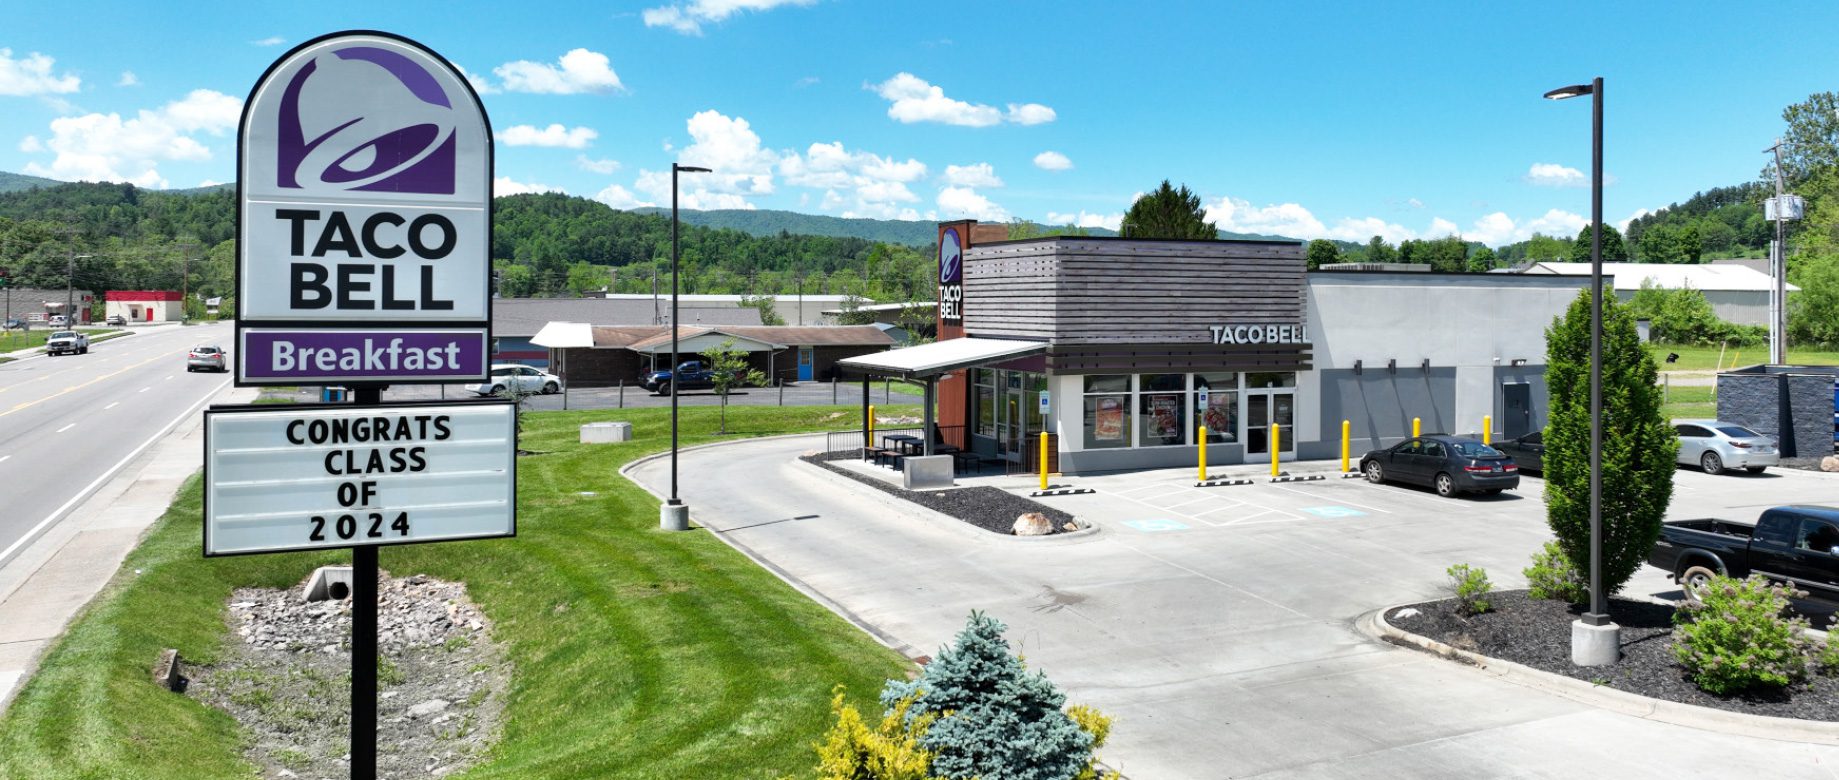 Taco Bell Exterior with covered Patio and Drive Thru